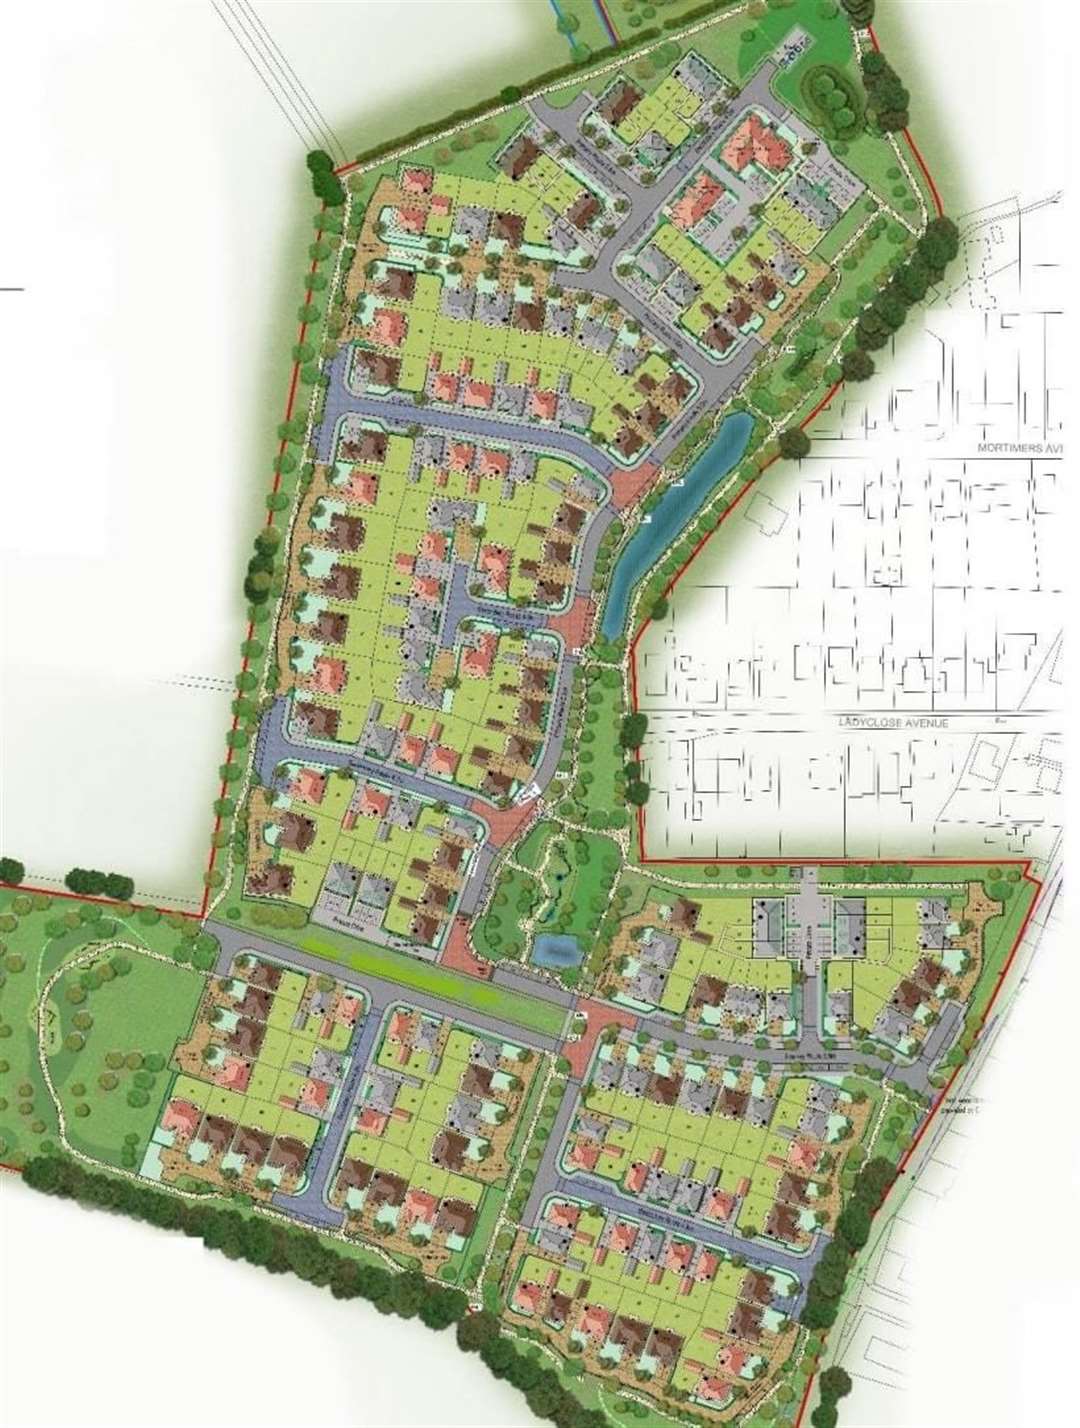 The layout of the housing development by Redrow in Cliffe Woods